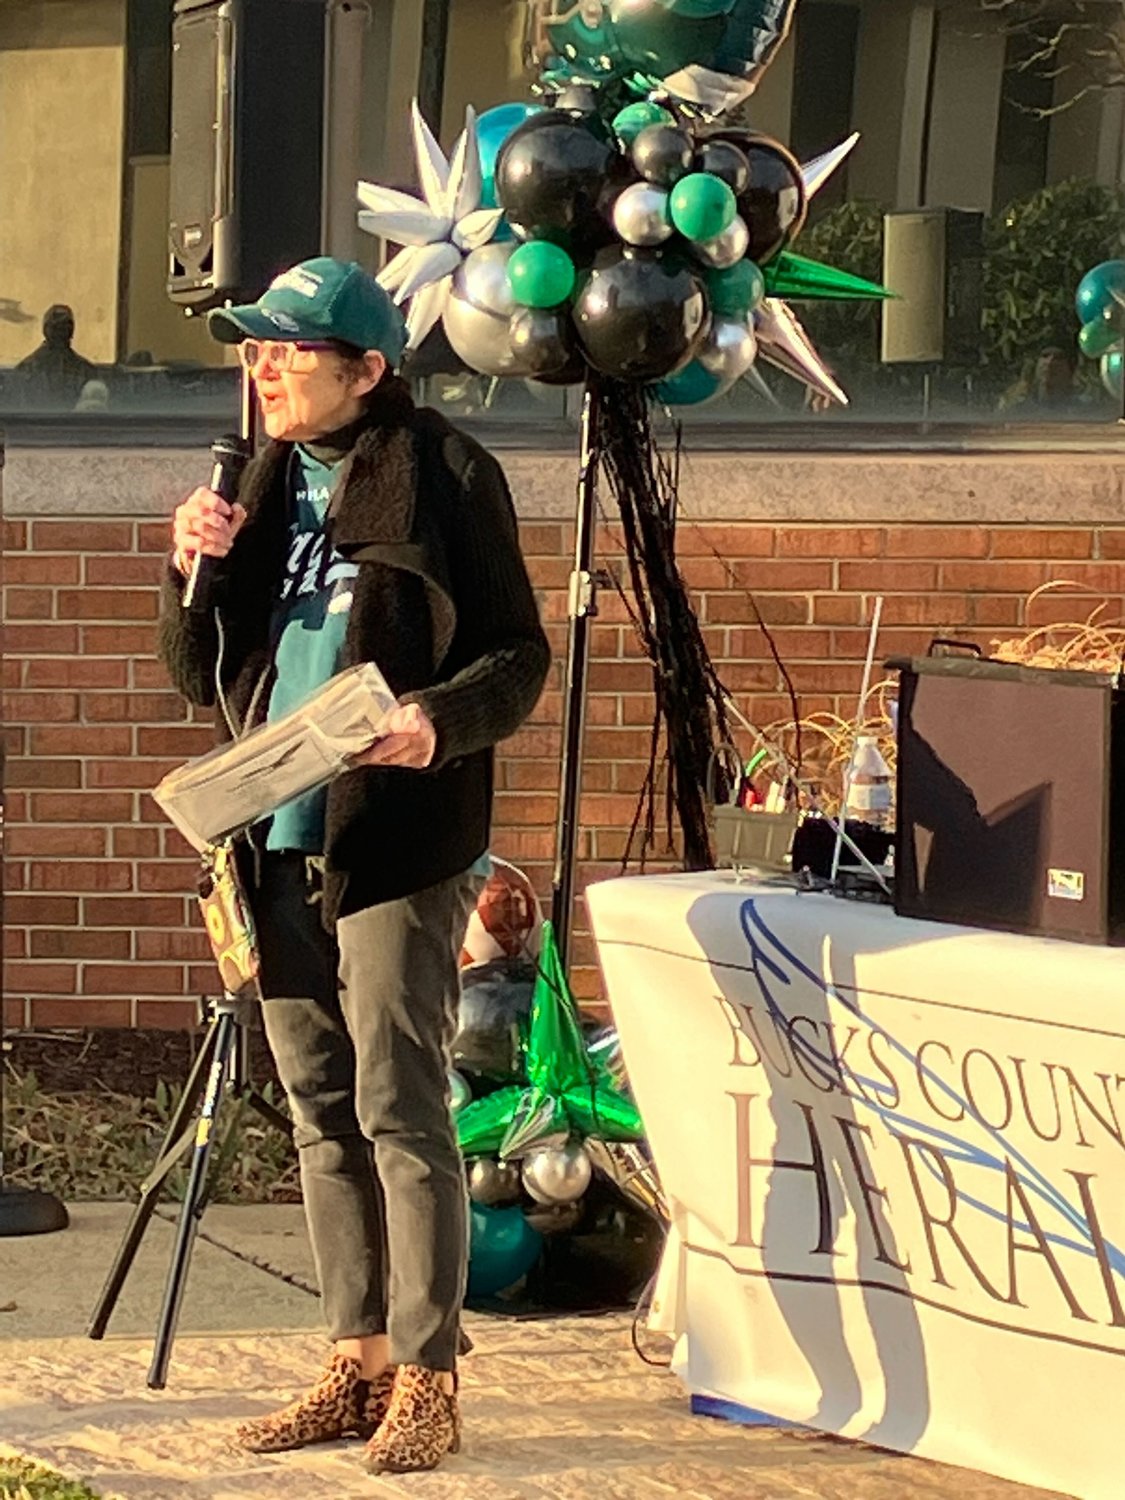 Noni West, Mayor of Doylestown, speaks. Birds fans gathered at the Old County Courthouse Lawn at Court and Main streets in Doylestown for “The Herald’s Road to the Big Game Pep Rally” Friday, Jan. 27, 2023.